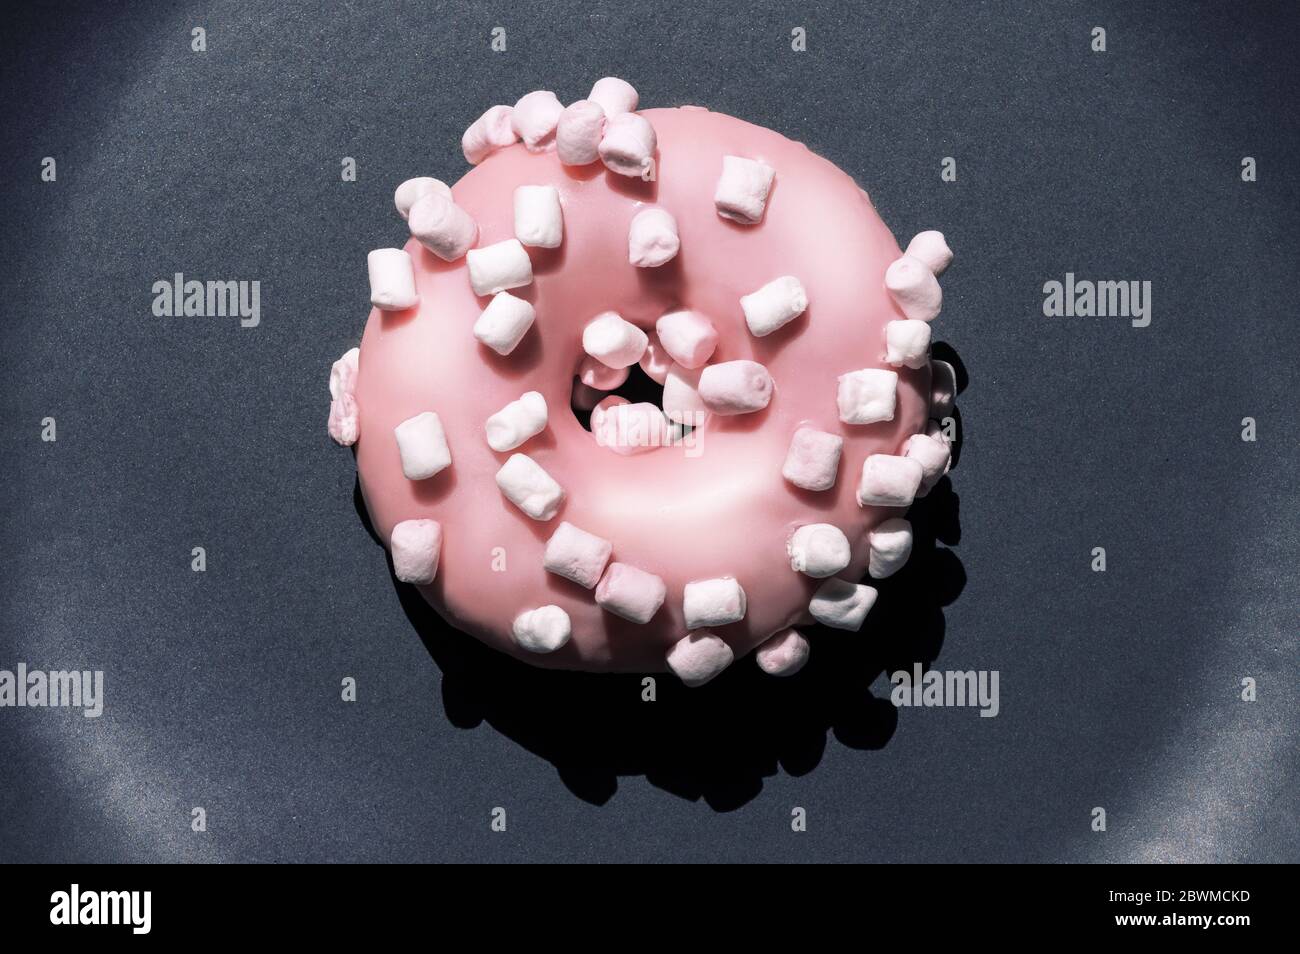 Top view of delicious single pink donat with white marshmallows on the dark grey ceramic plate. Creartive sweet food macro concept. Isolated bright Stock Photo